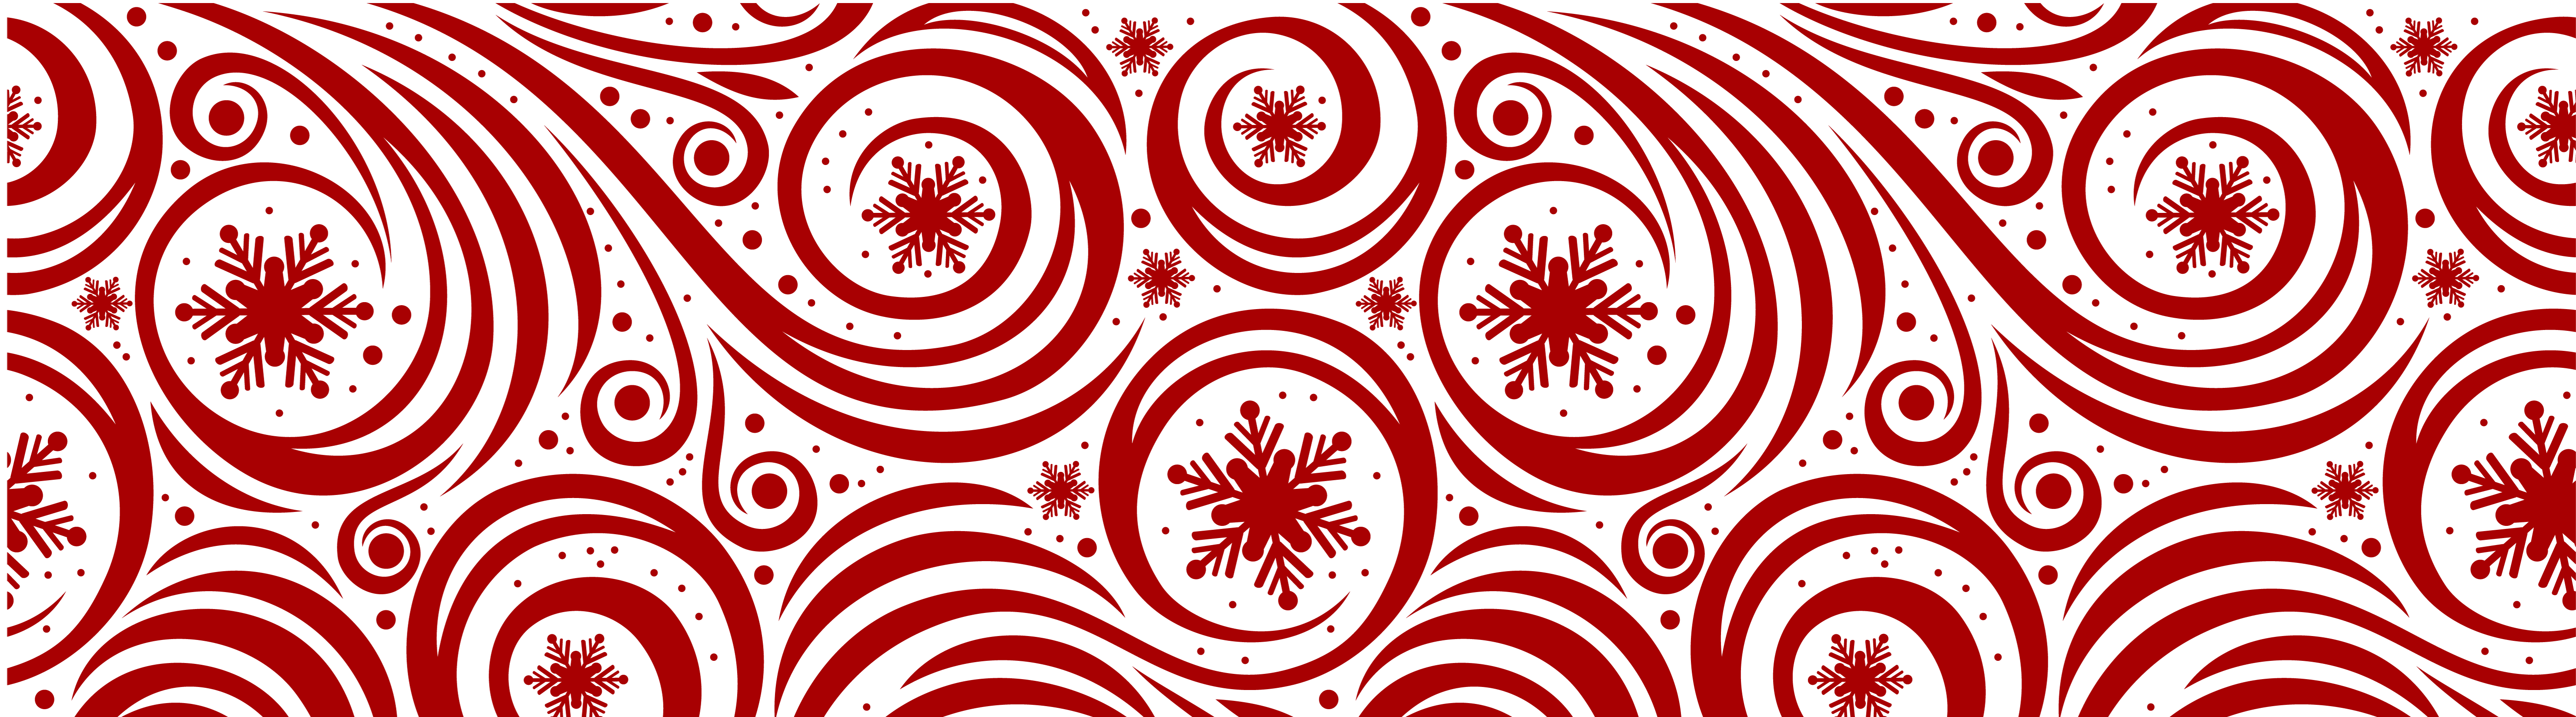 Transparent Red Christmas Decoration For Wallpaper Clipart